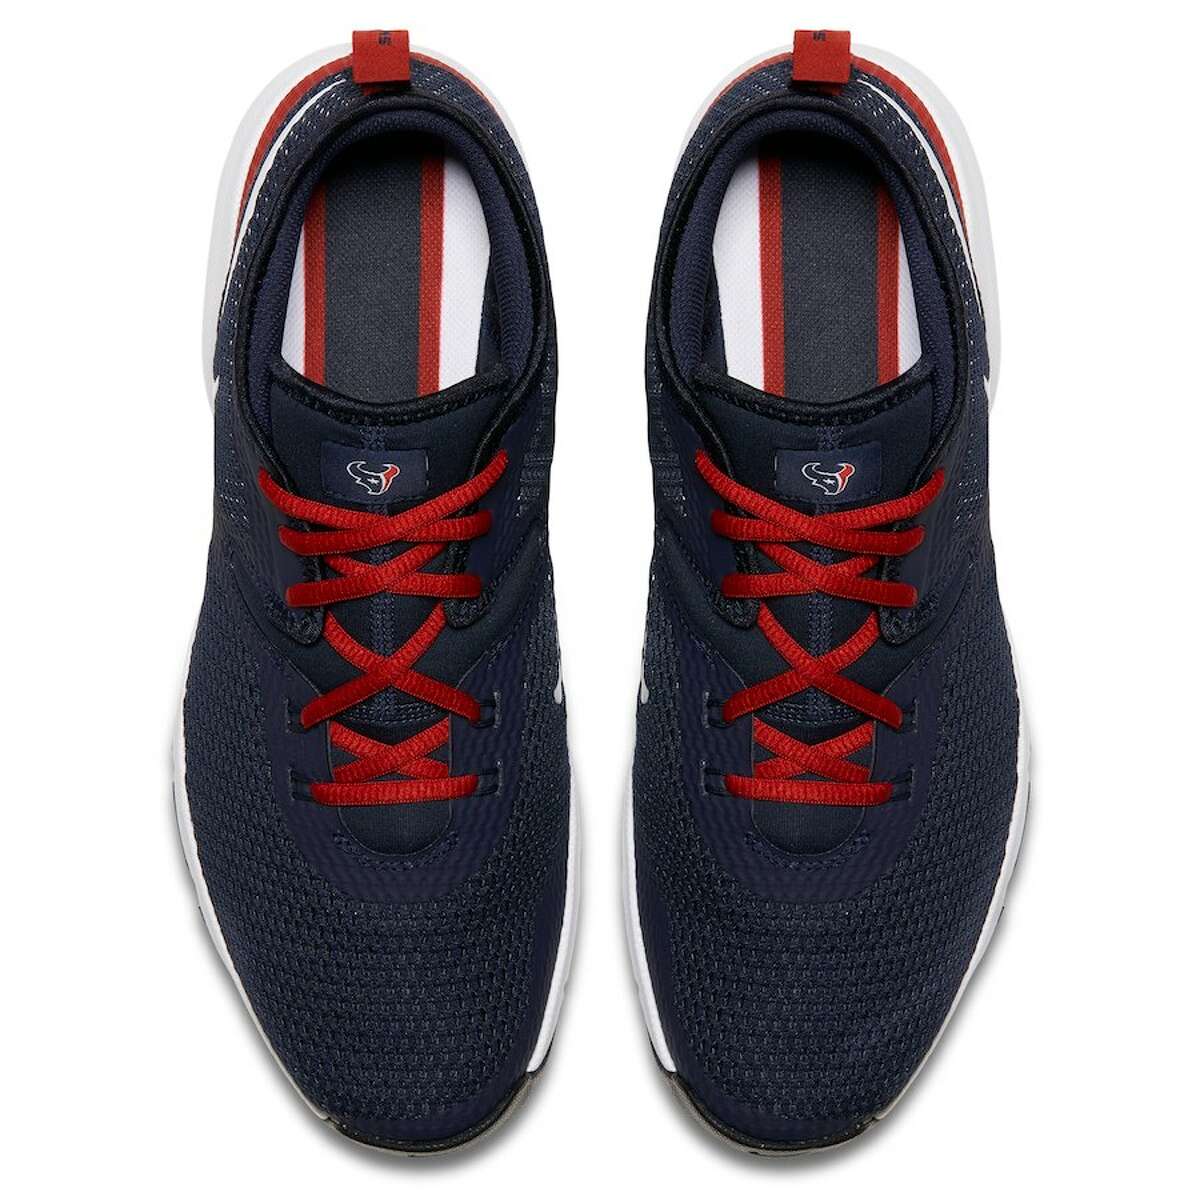 The Houston Texans version of the Air Max Typha 2 collection.